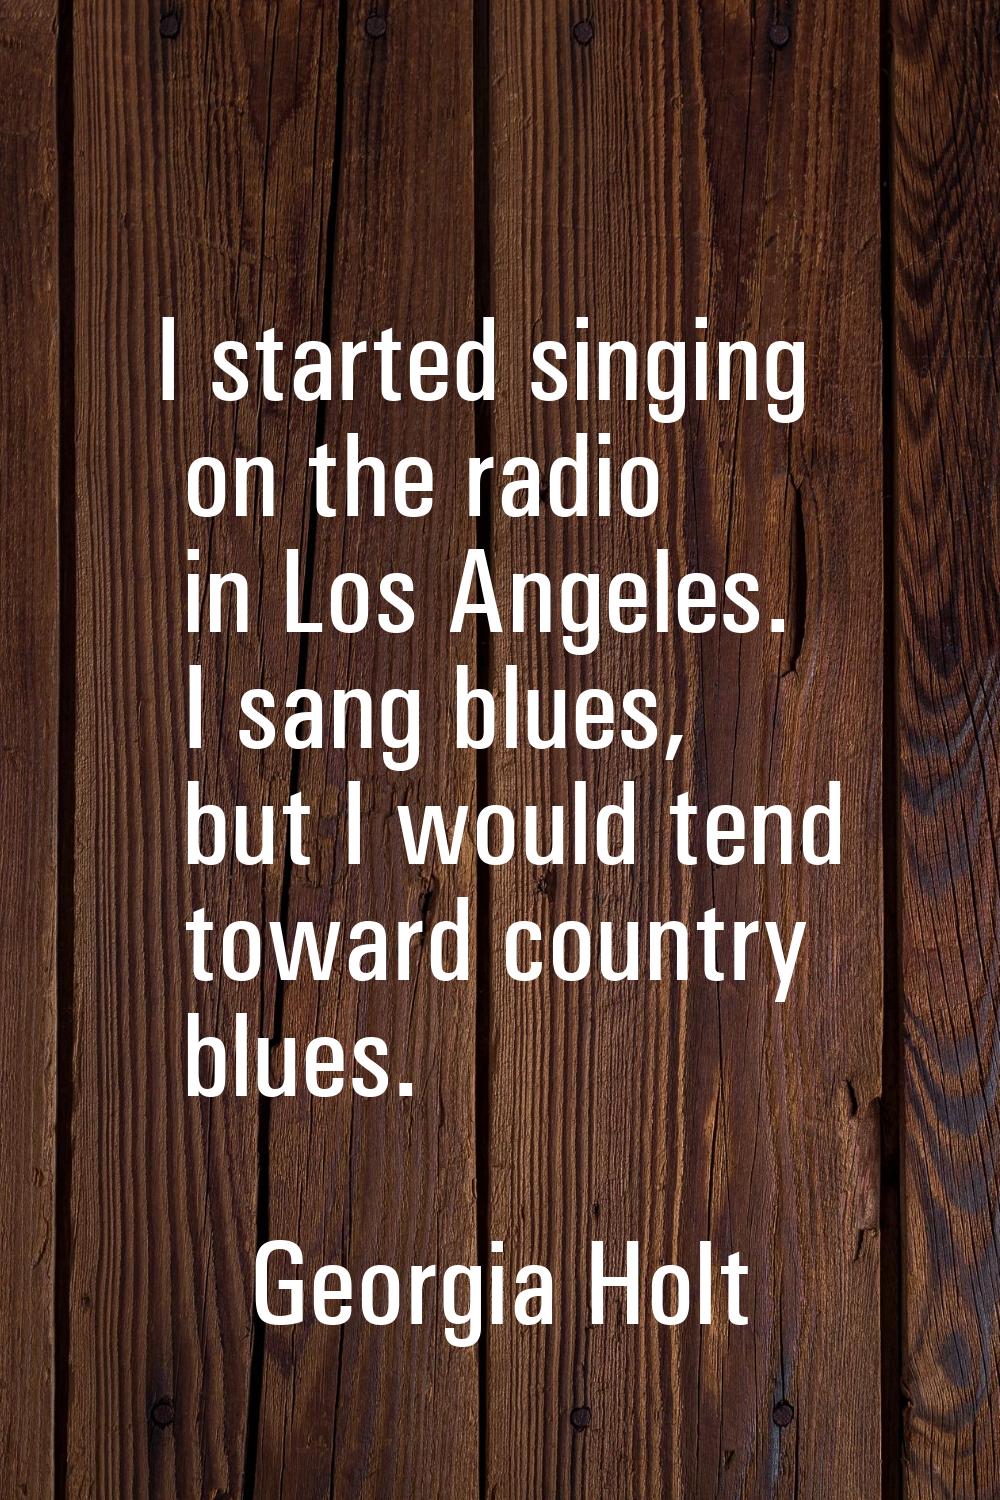 I started singing on the radio in Los Angeles. I sang blues, but I would tend toward country blues.